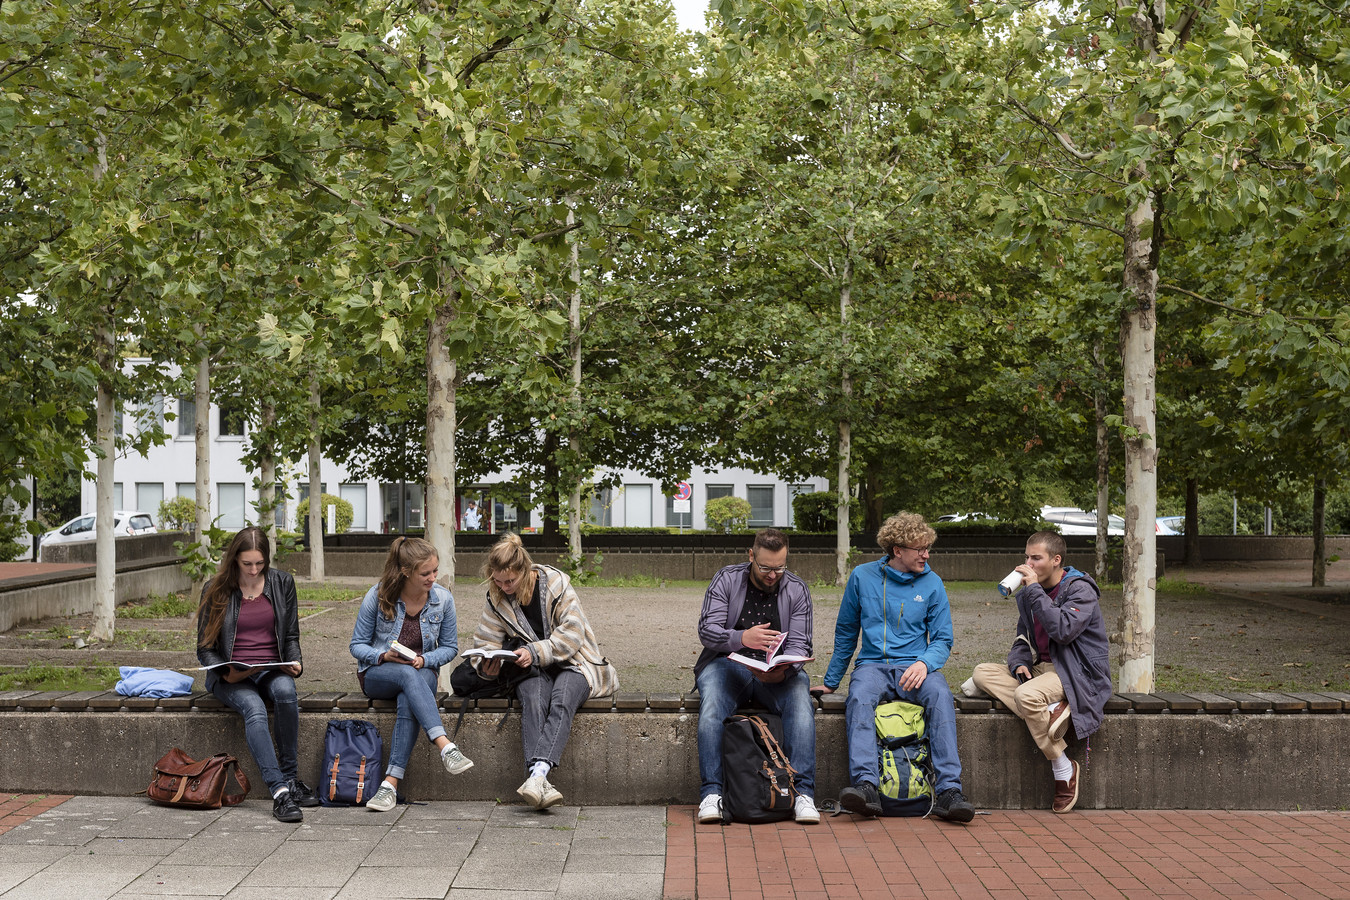 Students are sitting on a long bench, holding books and talking to each other.